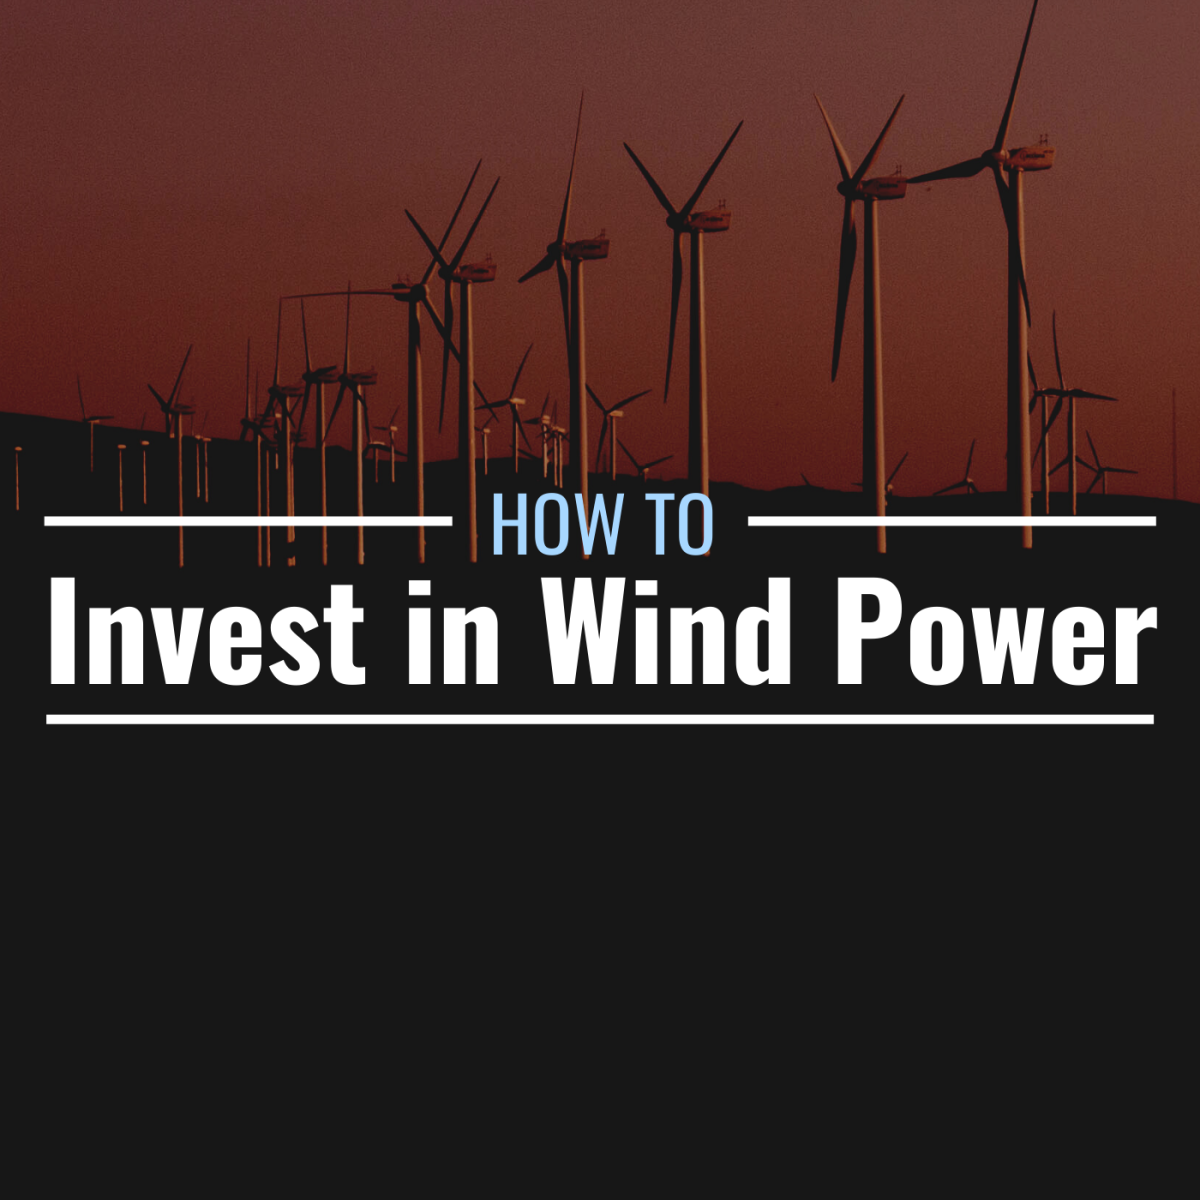 Photo of a wind turbans in the countryside with text overlay that reads "How to Invest in Wind Power"